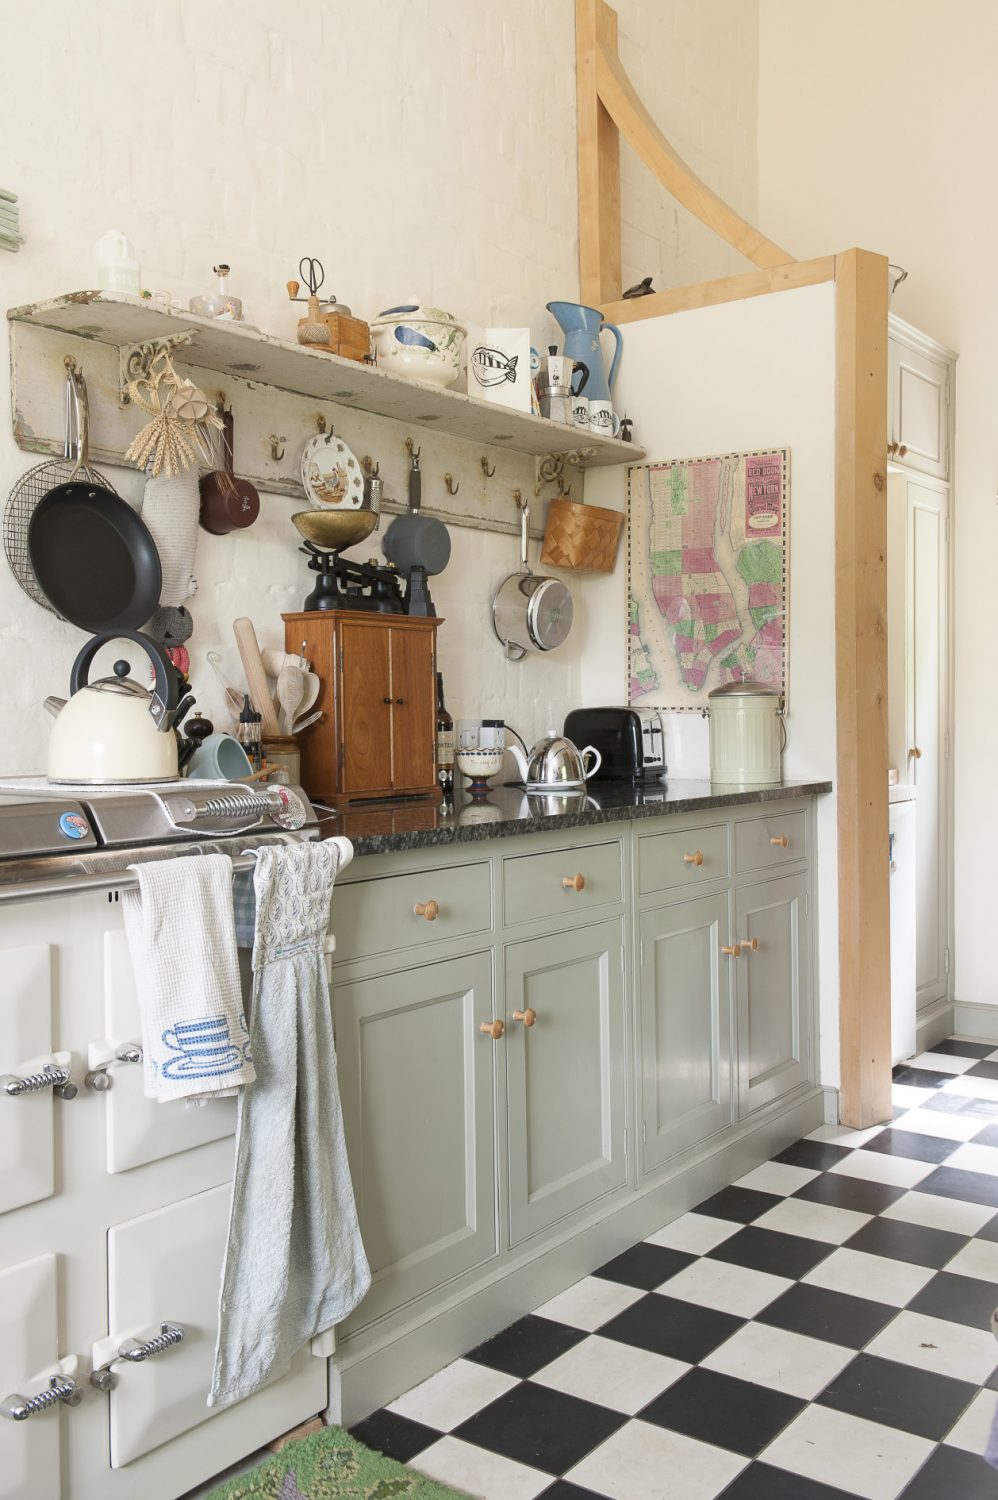 “There was a lovely big old model C Aga in the kitchen – an original dating back to the 1930s – but it was hugely inefficient so we really had to replace it. We opted for a more economical range, but it doesn’t give off any heat,”